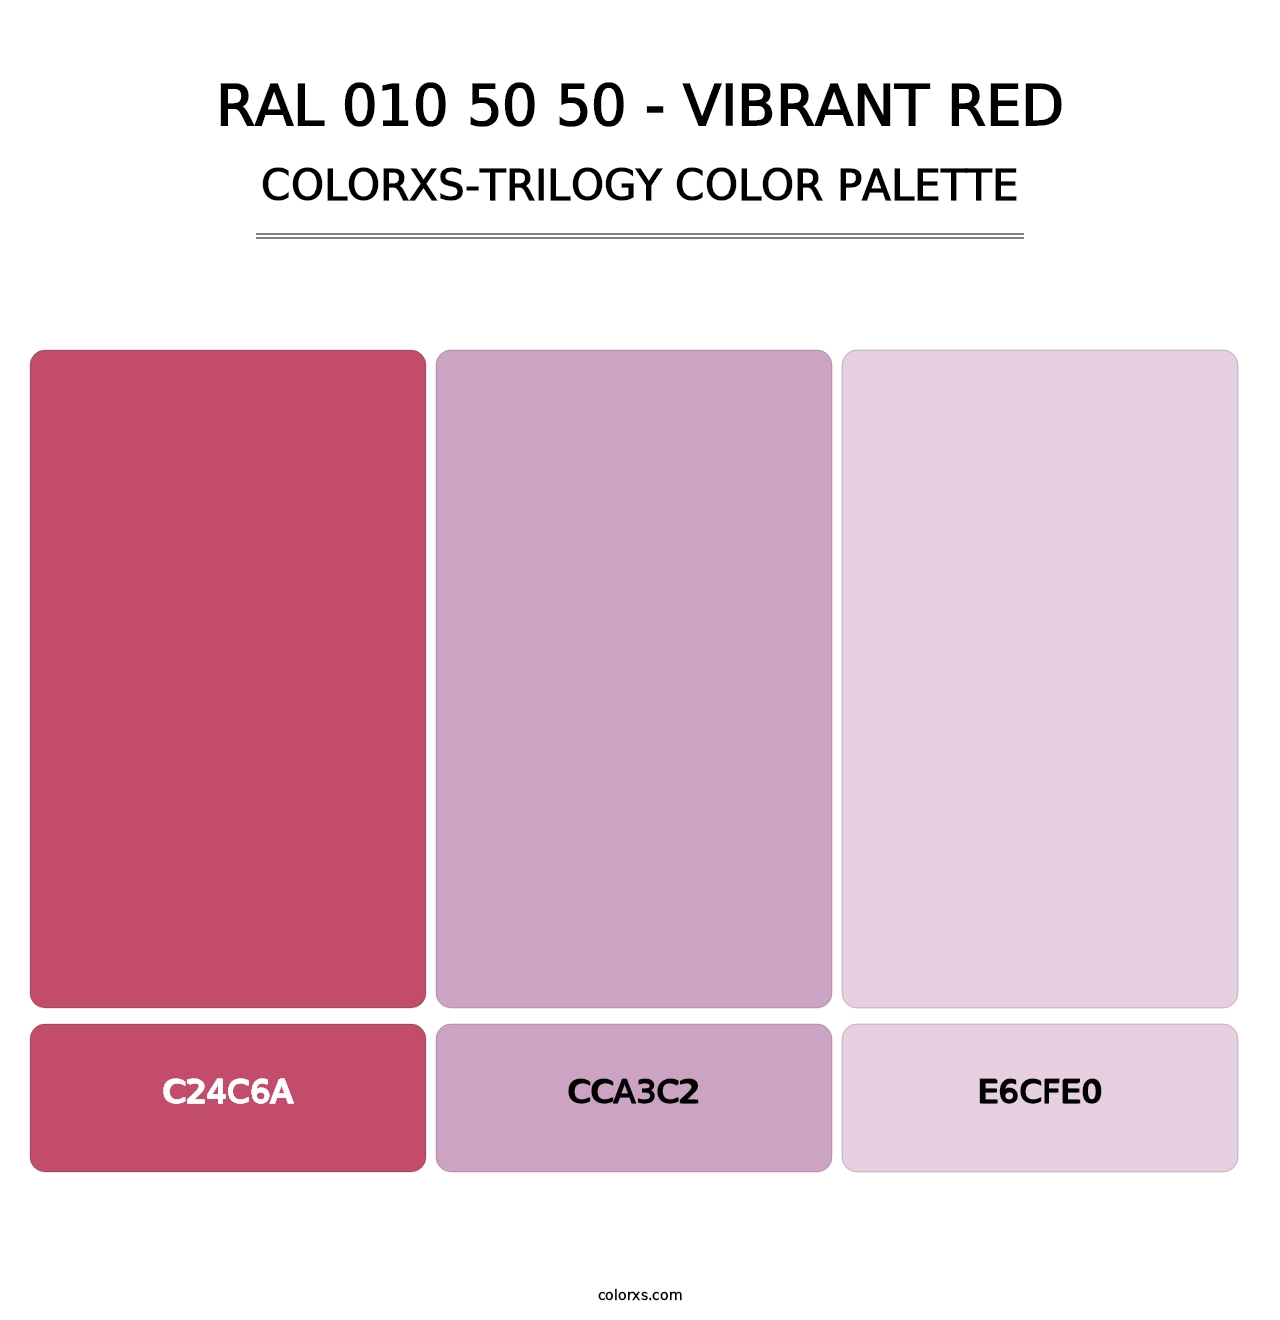 RAL 010 50 50 - Vibrant Red - Colorxs Trilogy Palette